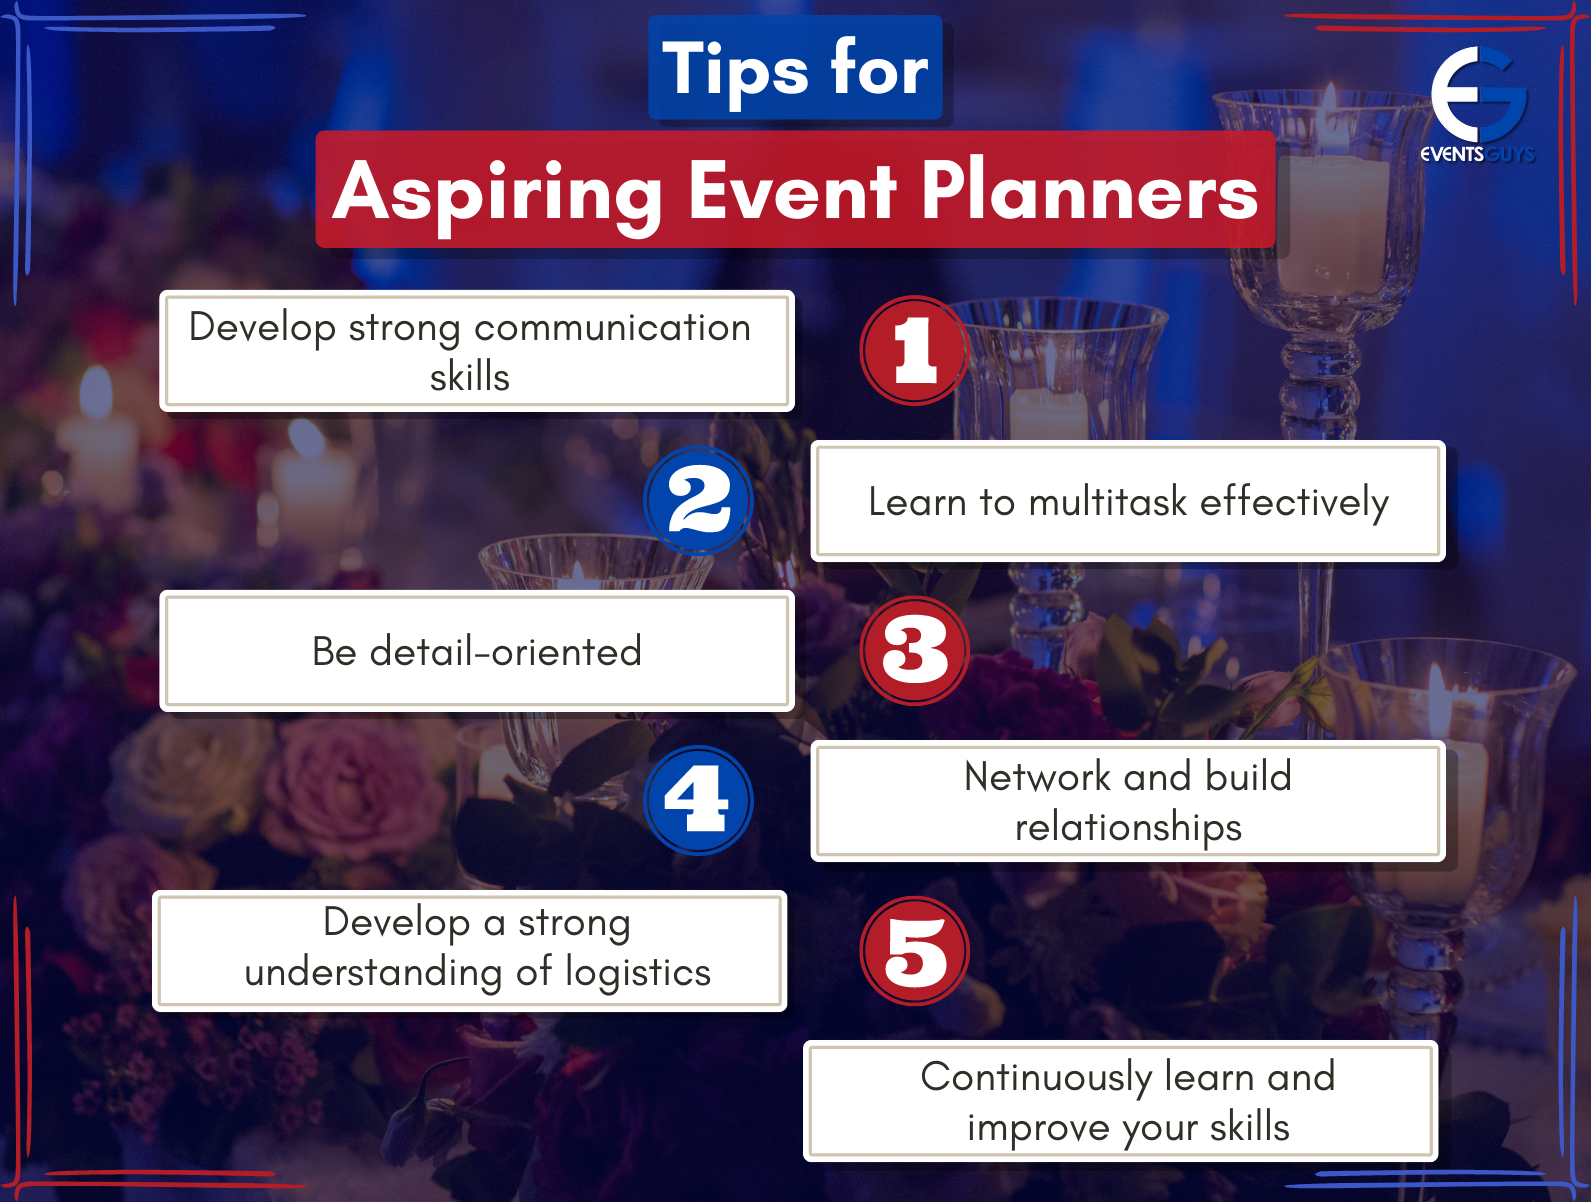 Tips for event planners